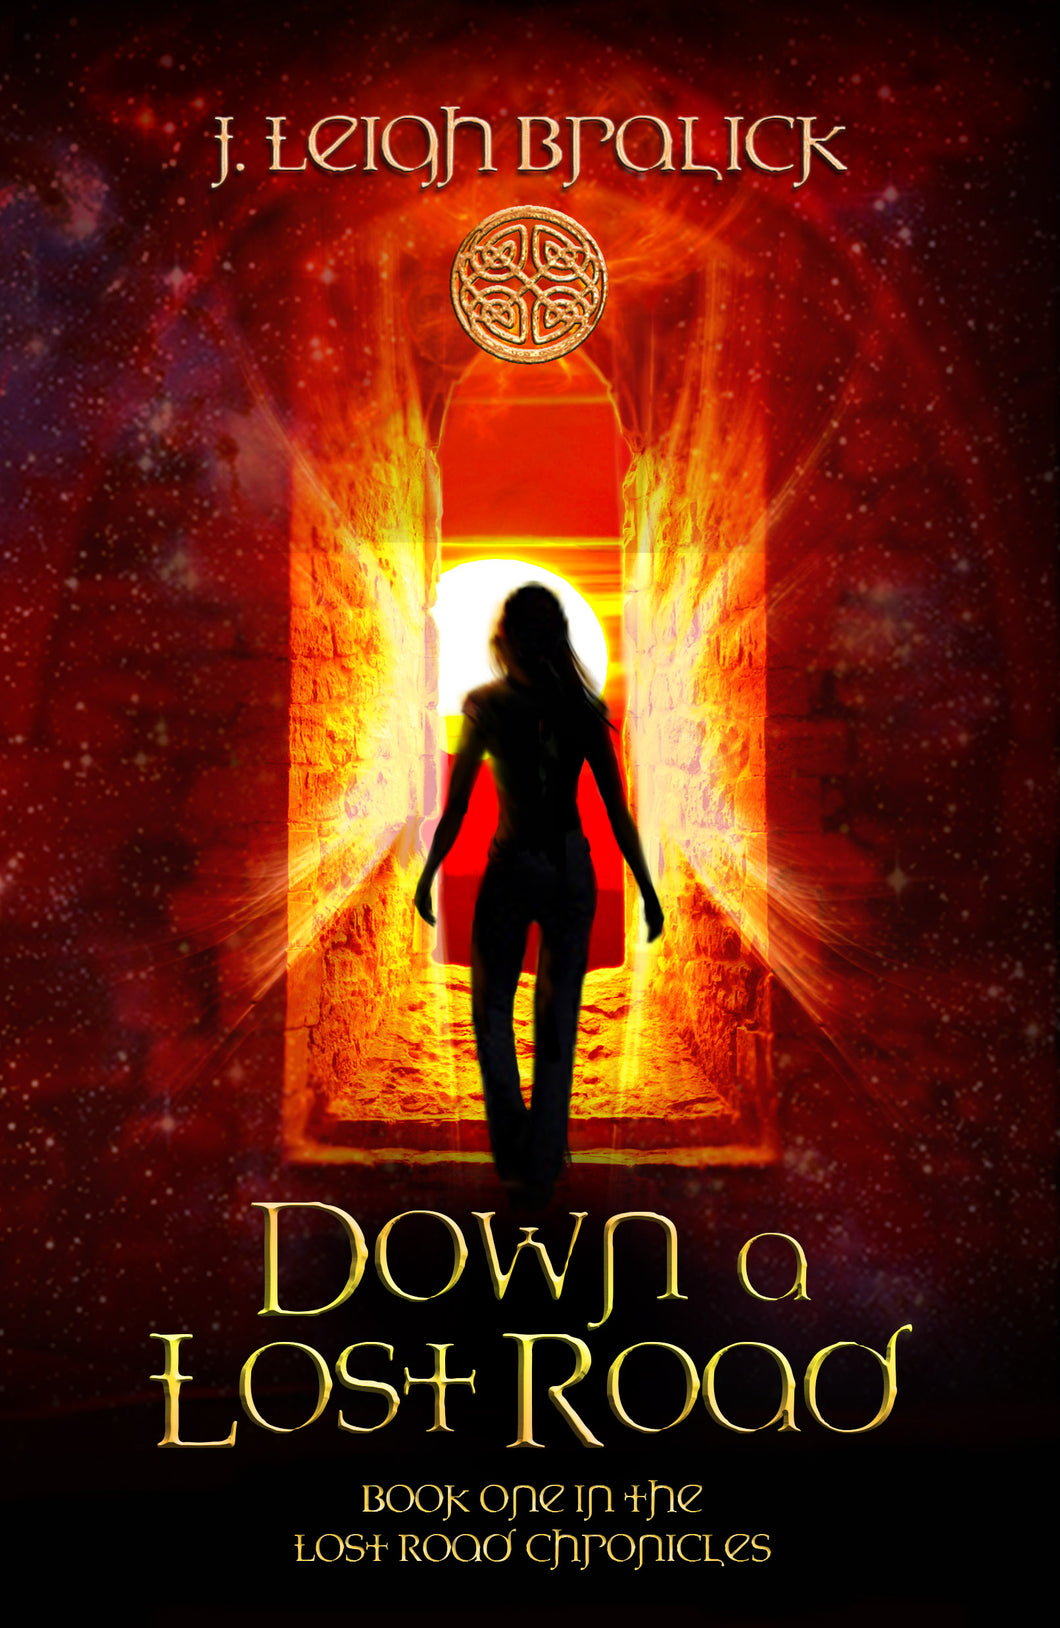 Down a Lost Road (Lost Road Chronicles #1)